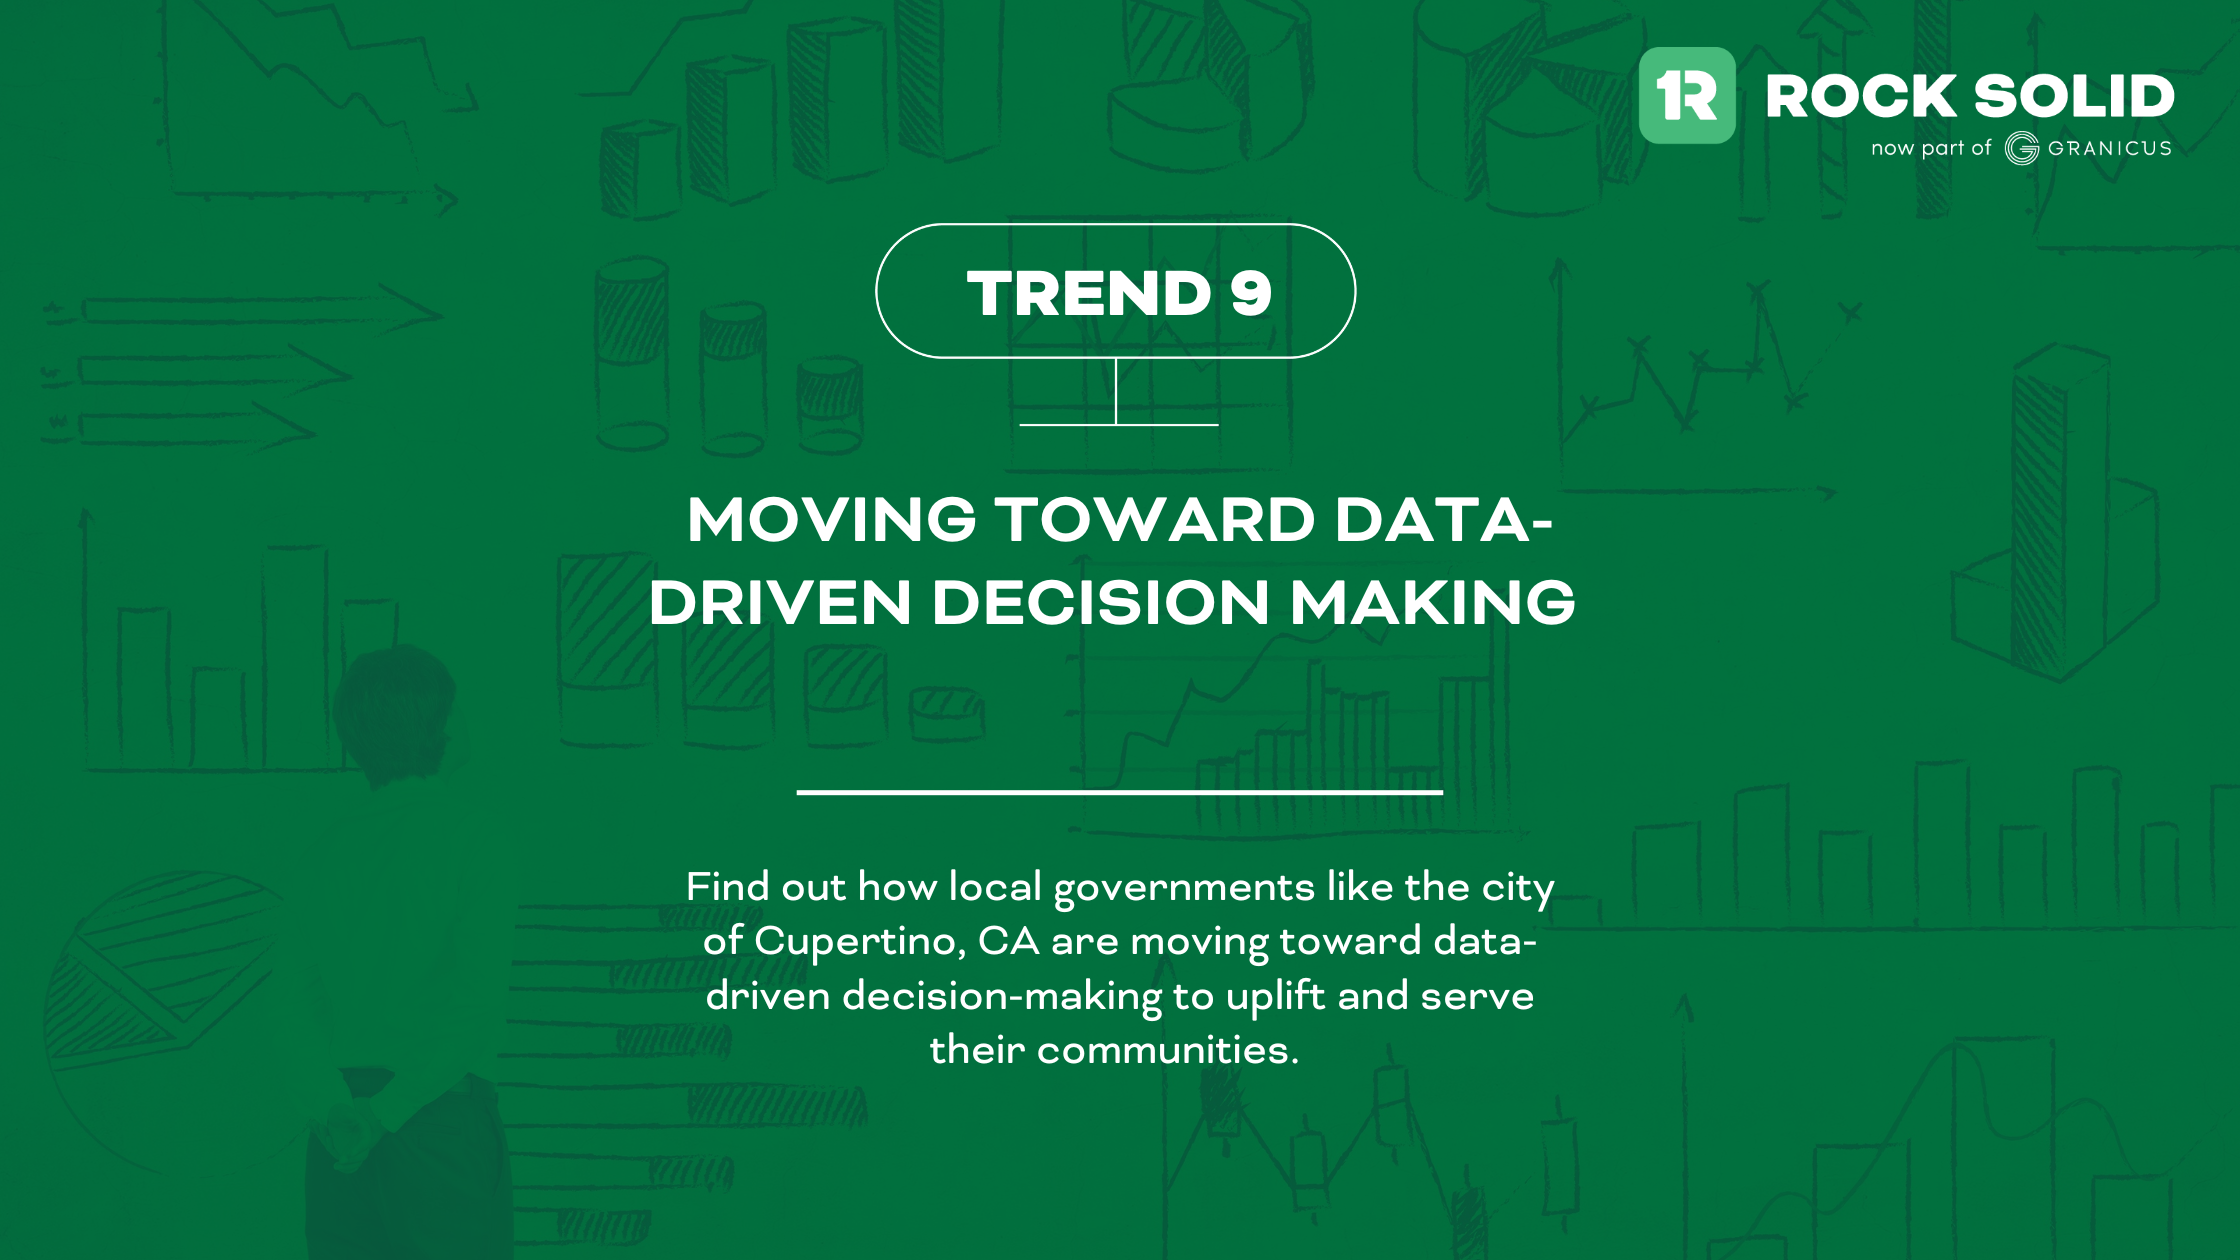 Trend 9: Moving Toward Data-Driven Decision Making